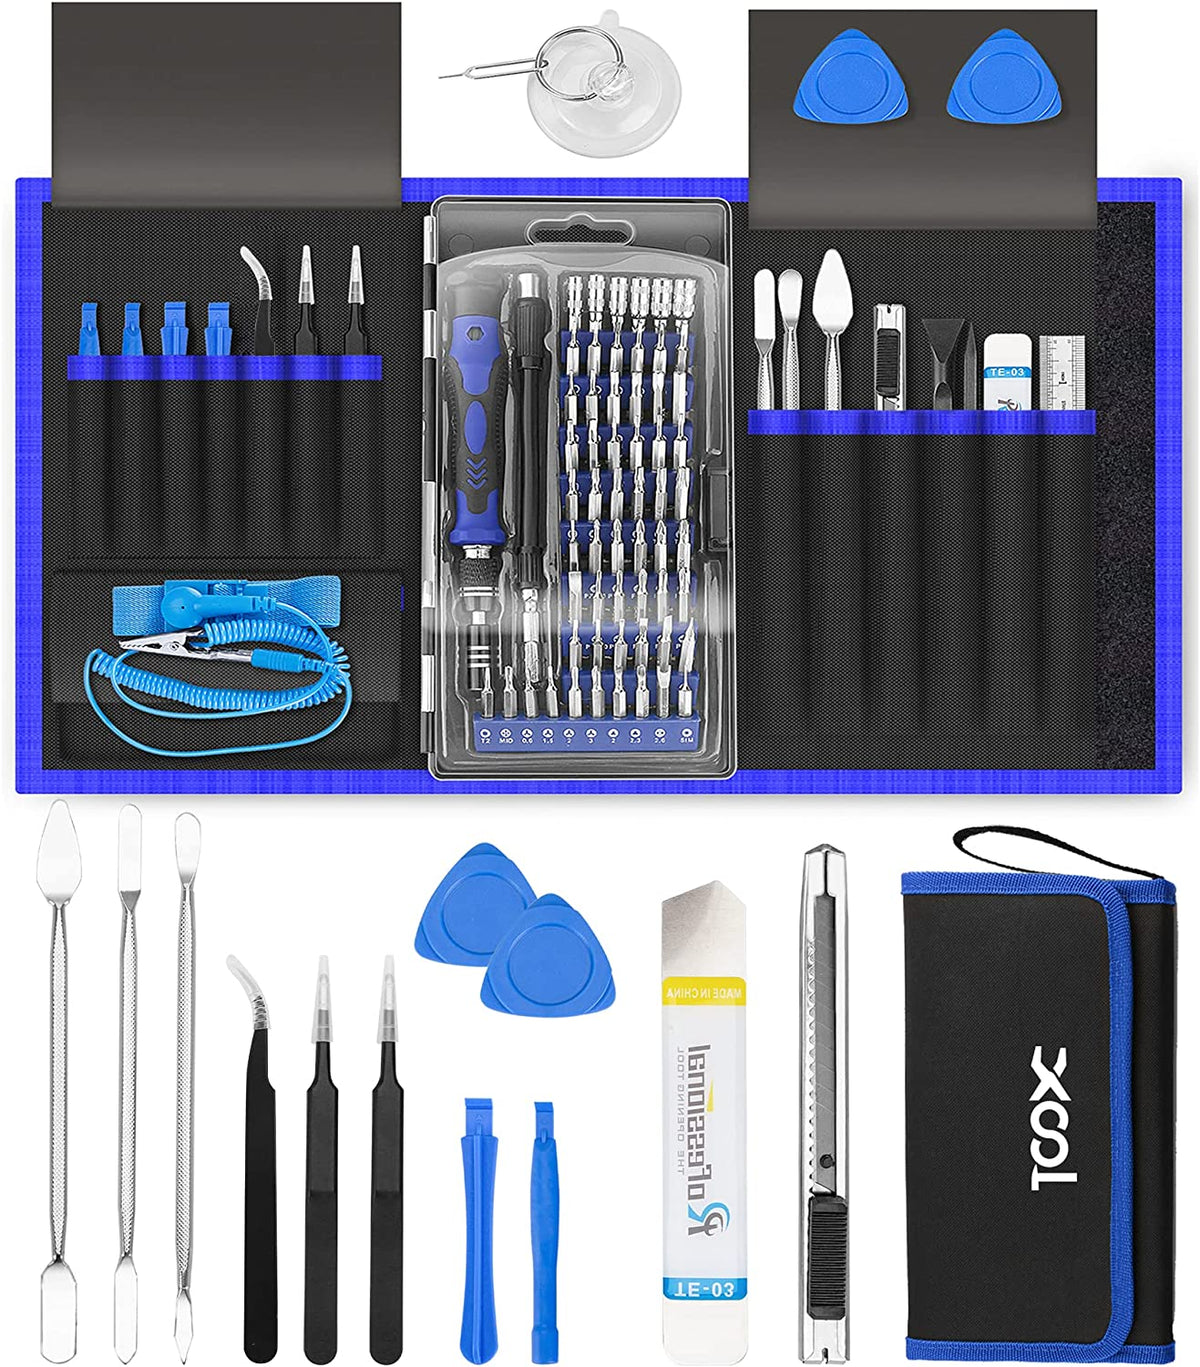 Professional Computer Repair Tool Kit, Precision Laptop Screwdriver Kit, XOOL 82 in 1 Electronics Repair Tool with 58 Magnetic Bits, Compatible for Macbook, iPhone, Game Console, Tablet